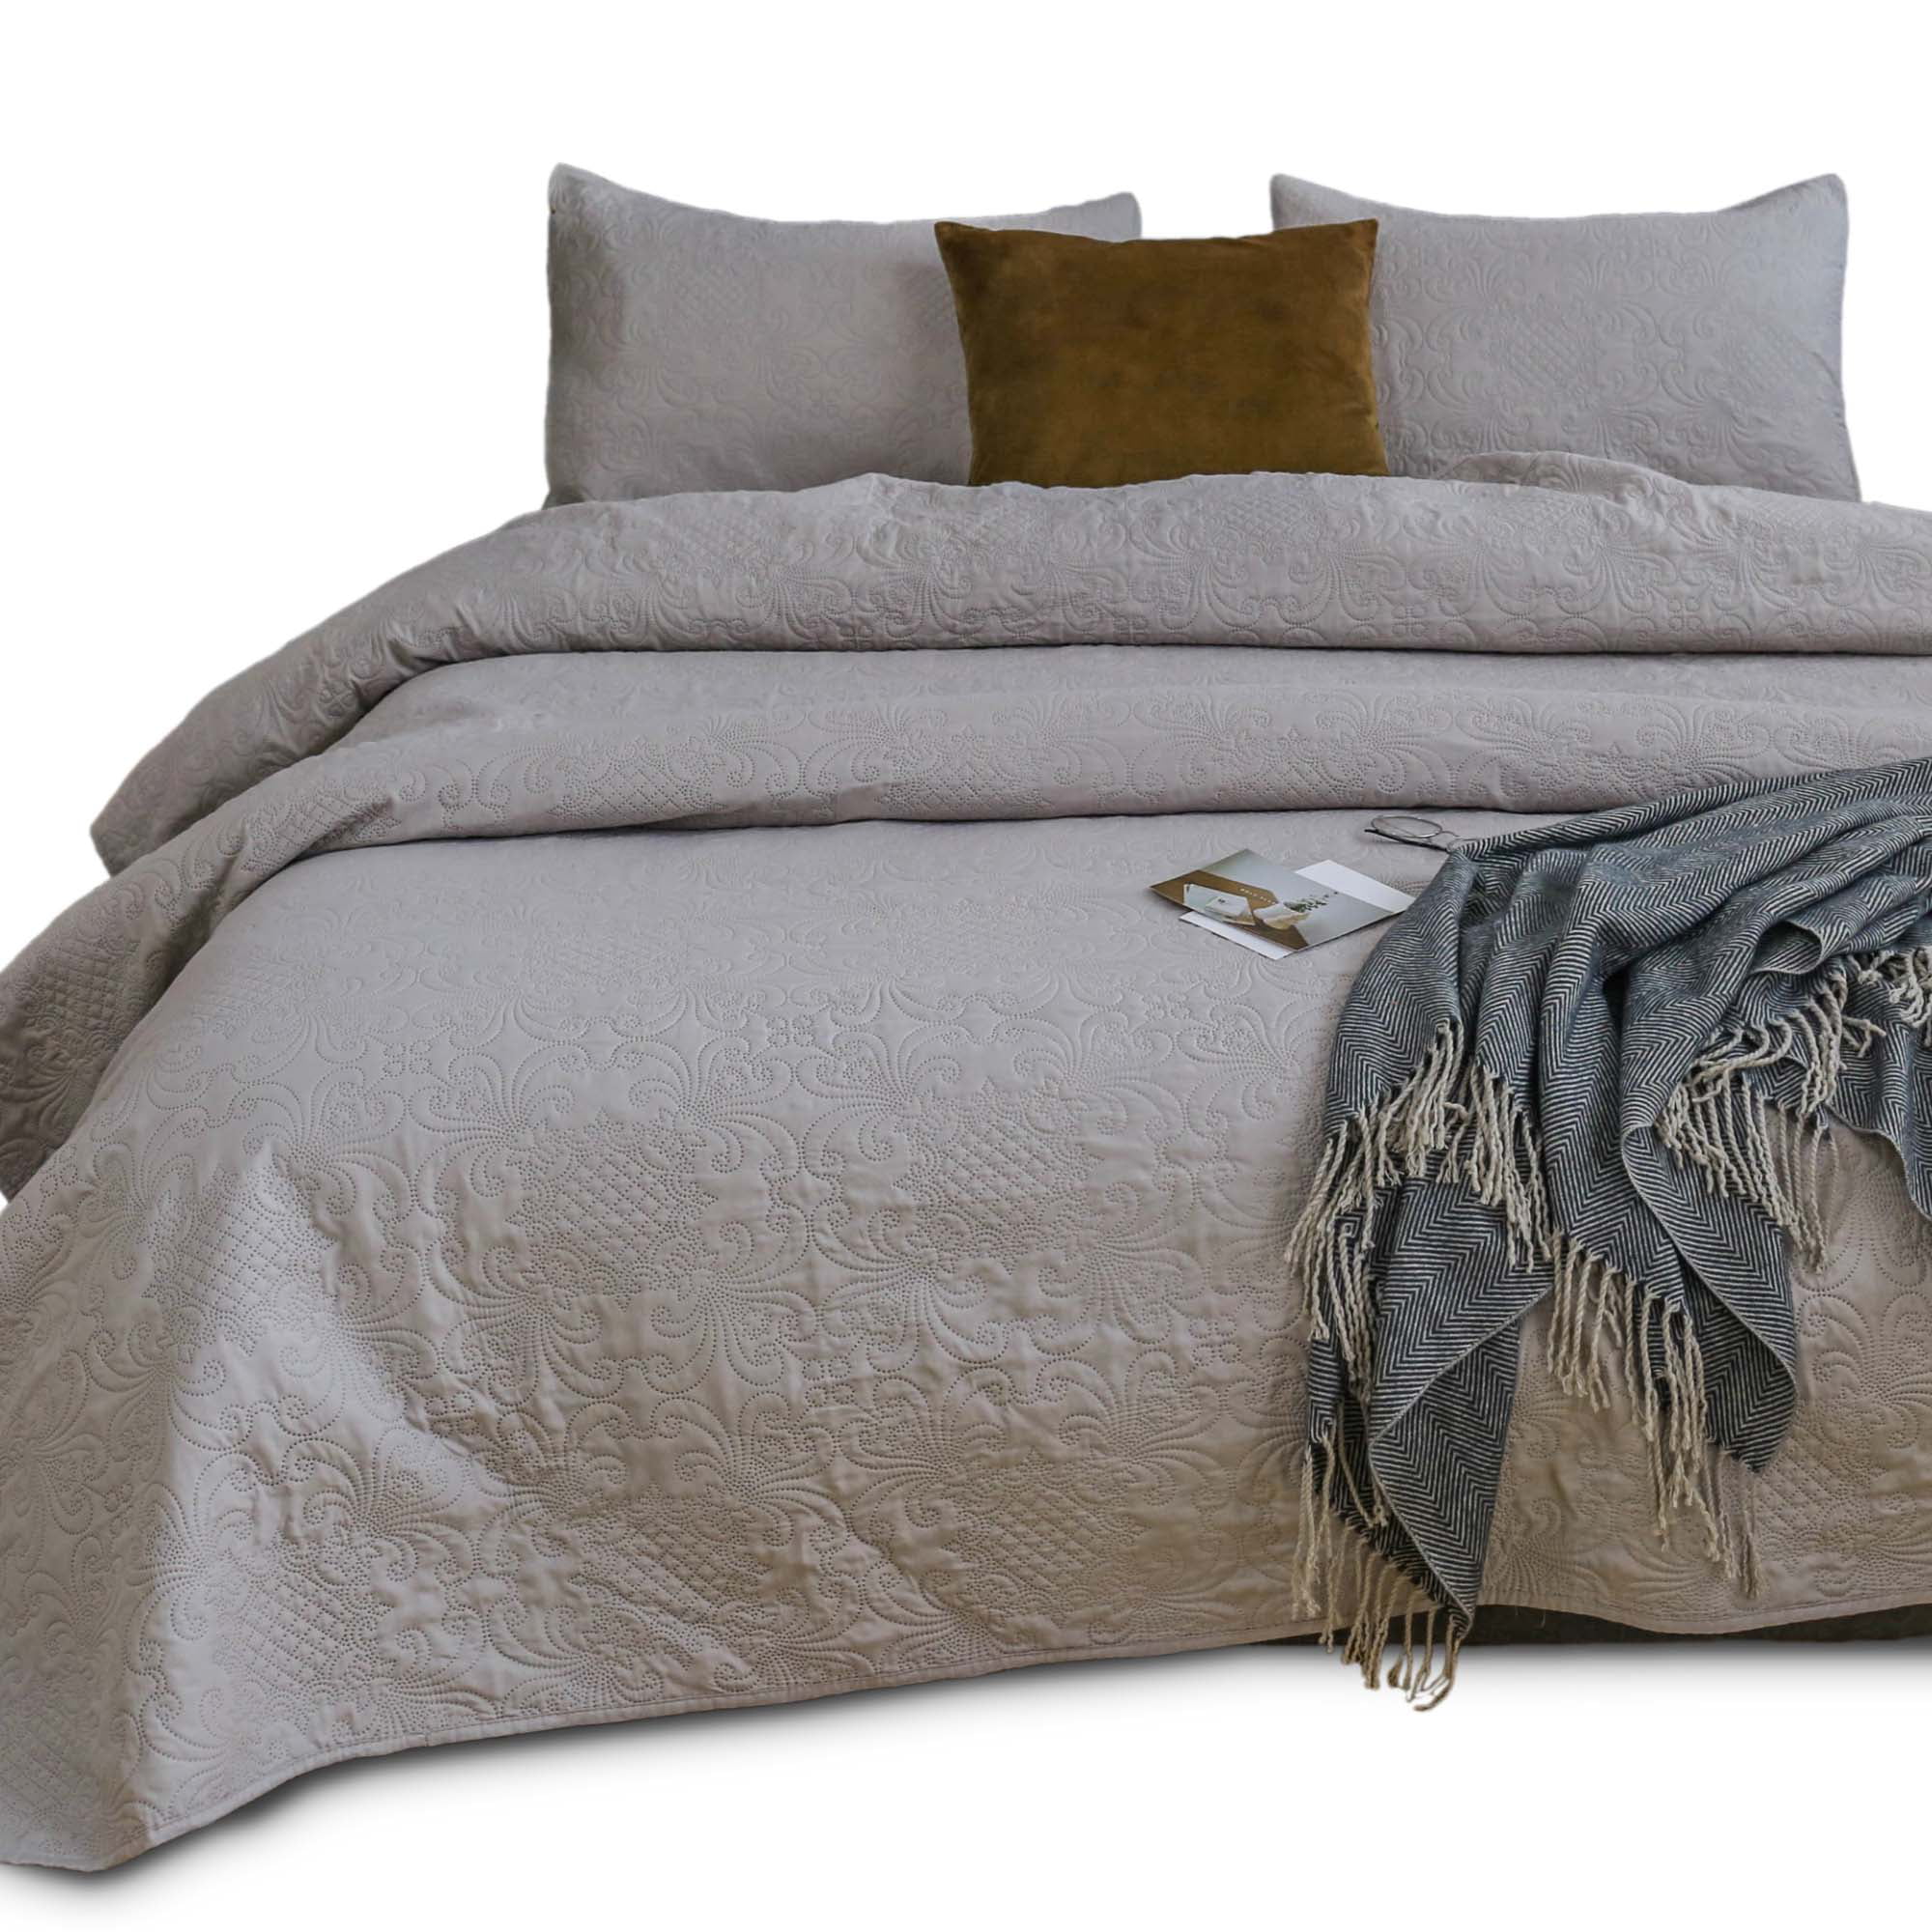 ~ CONTEMPORARY MODERN CHIC GREY WARM PLUSH COZY ULTRA SOFT COMFORTER SET Details about   NEW